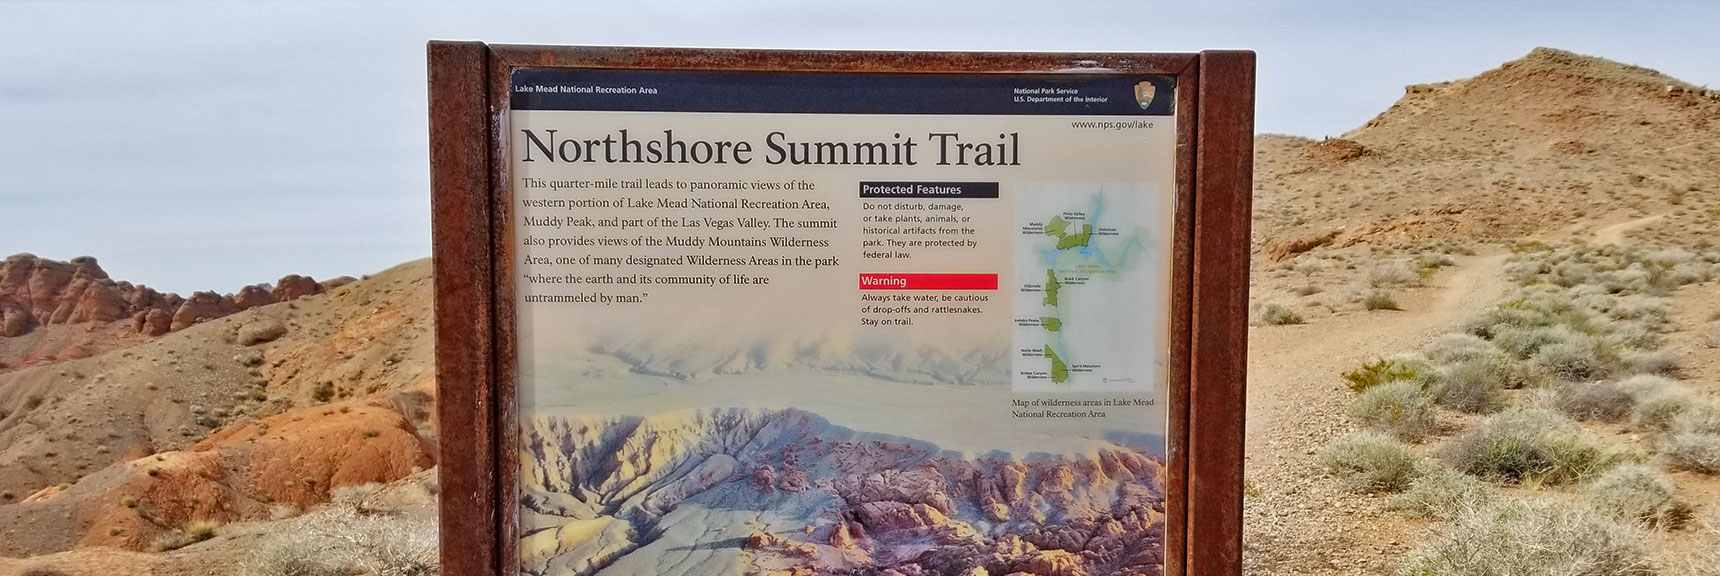 Northshore Summit Trail On Northshore Road in Lake Mead National Park, Nevada